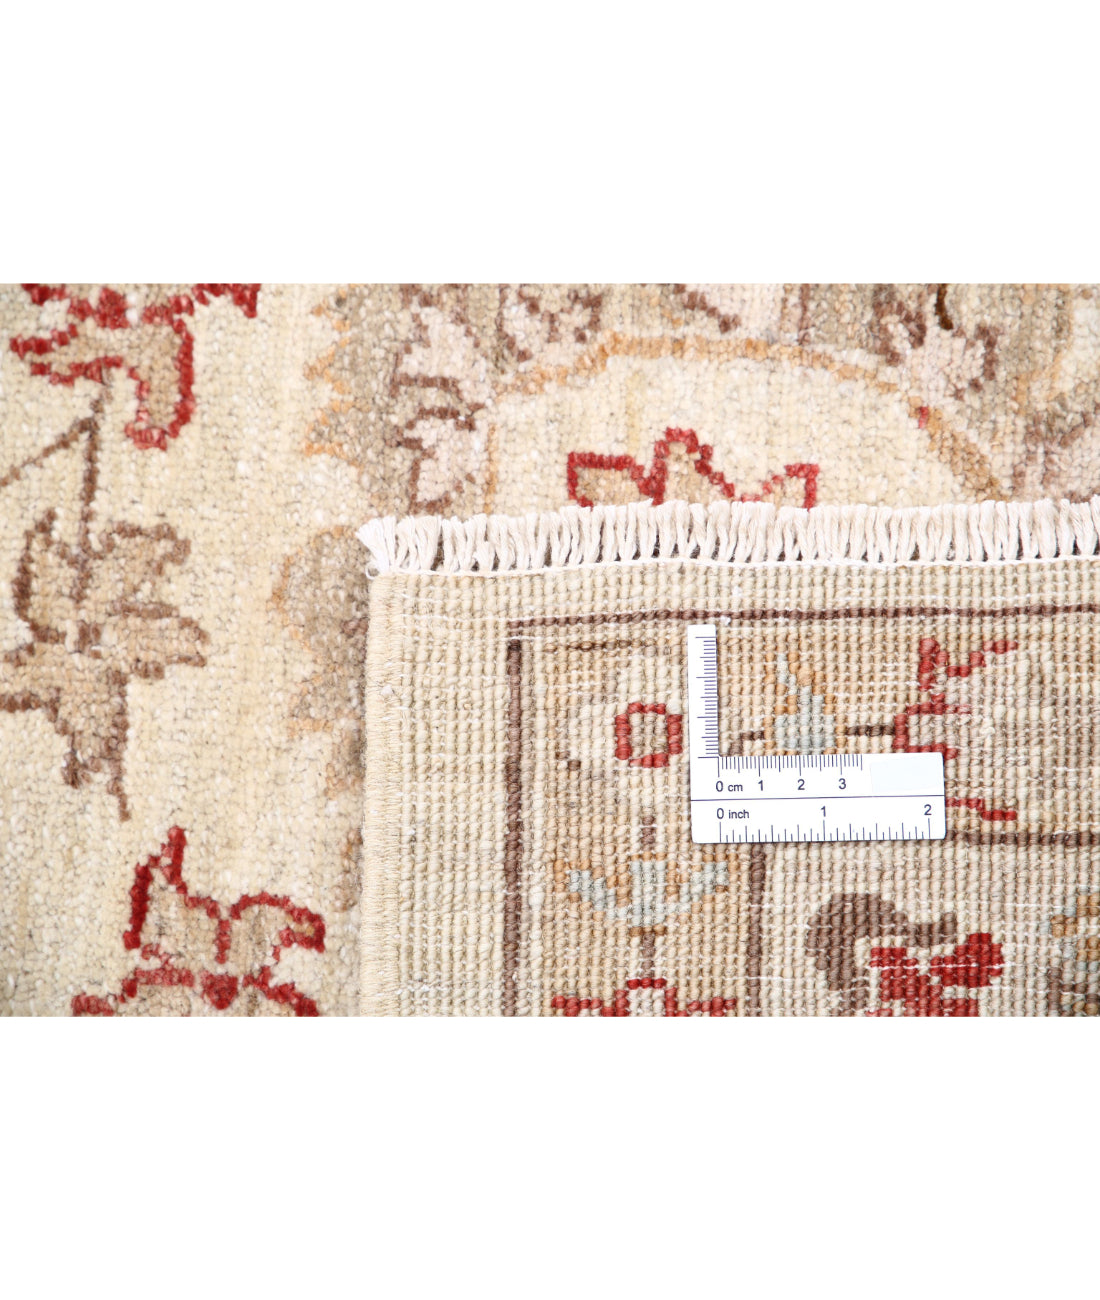 Ziegler 9'2'' X 11'7'' Hand-Knotted Wool Rug 9'2'' x 11'7'' (275 X 348) / Ivory / Taupe